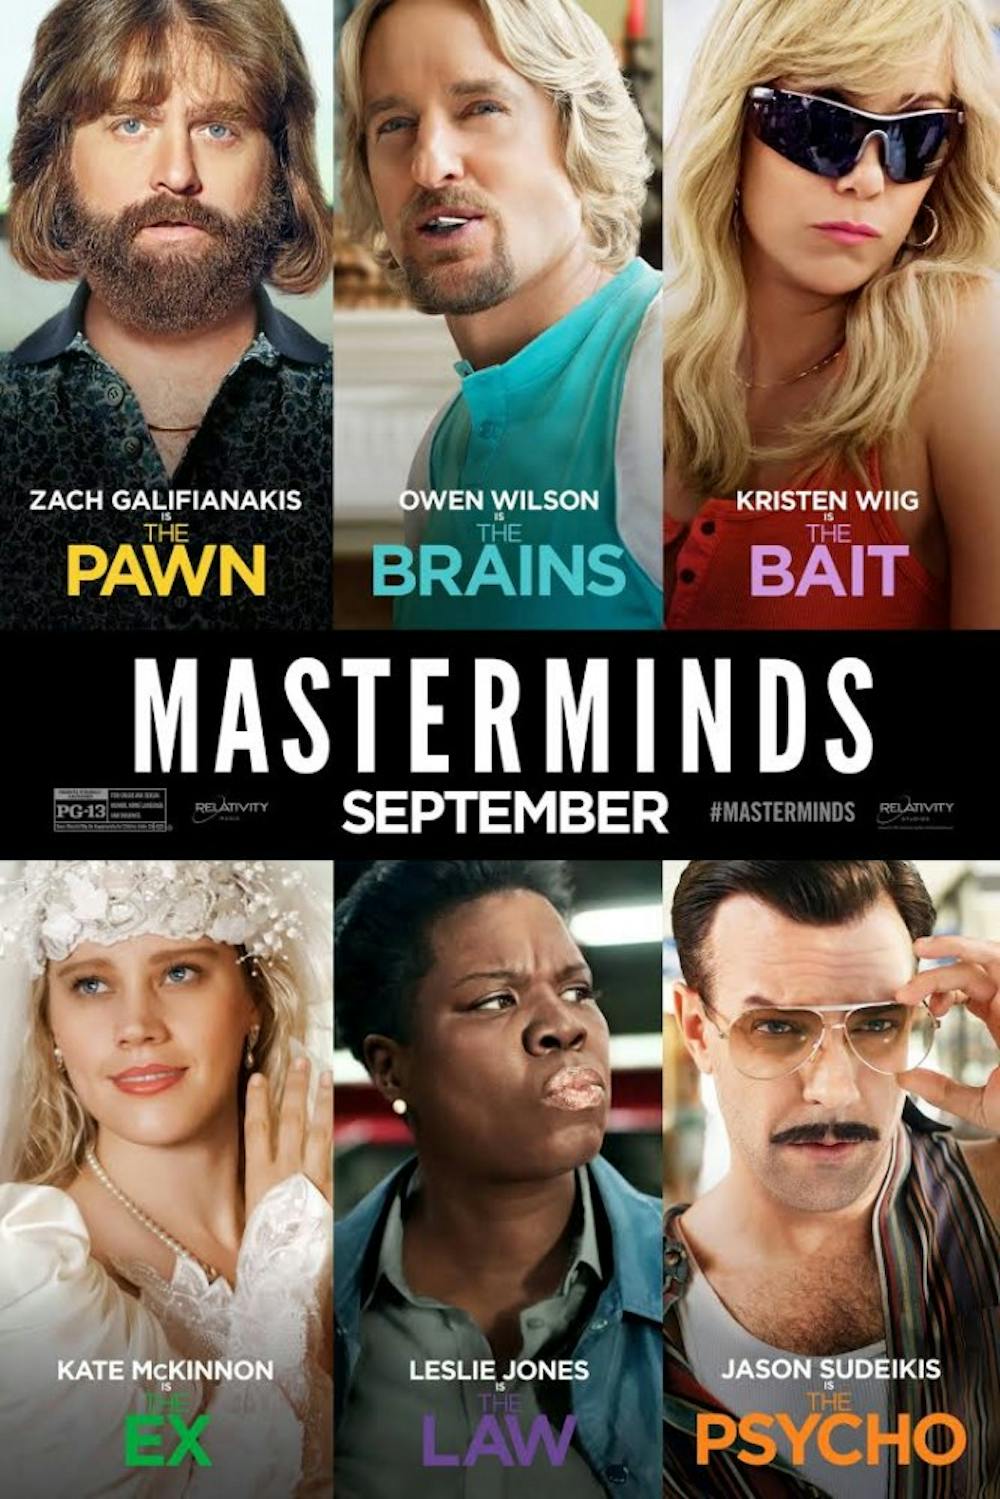 Movie Review: "Masterminds"